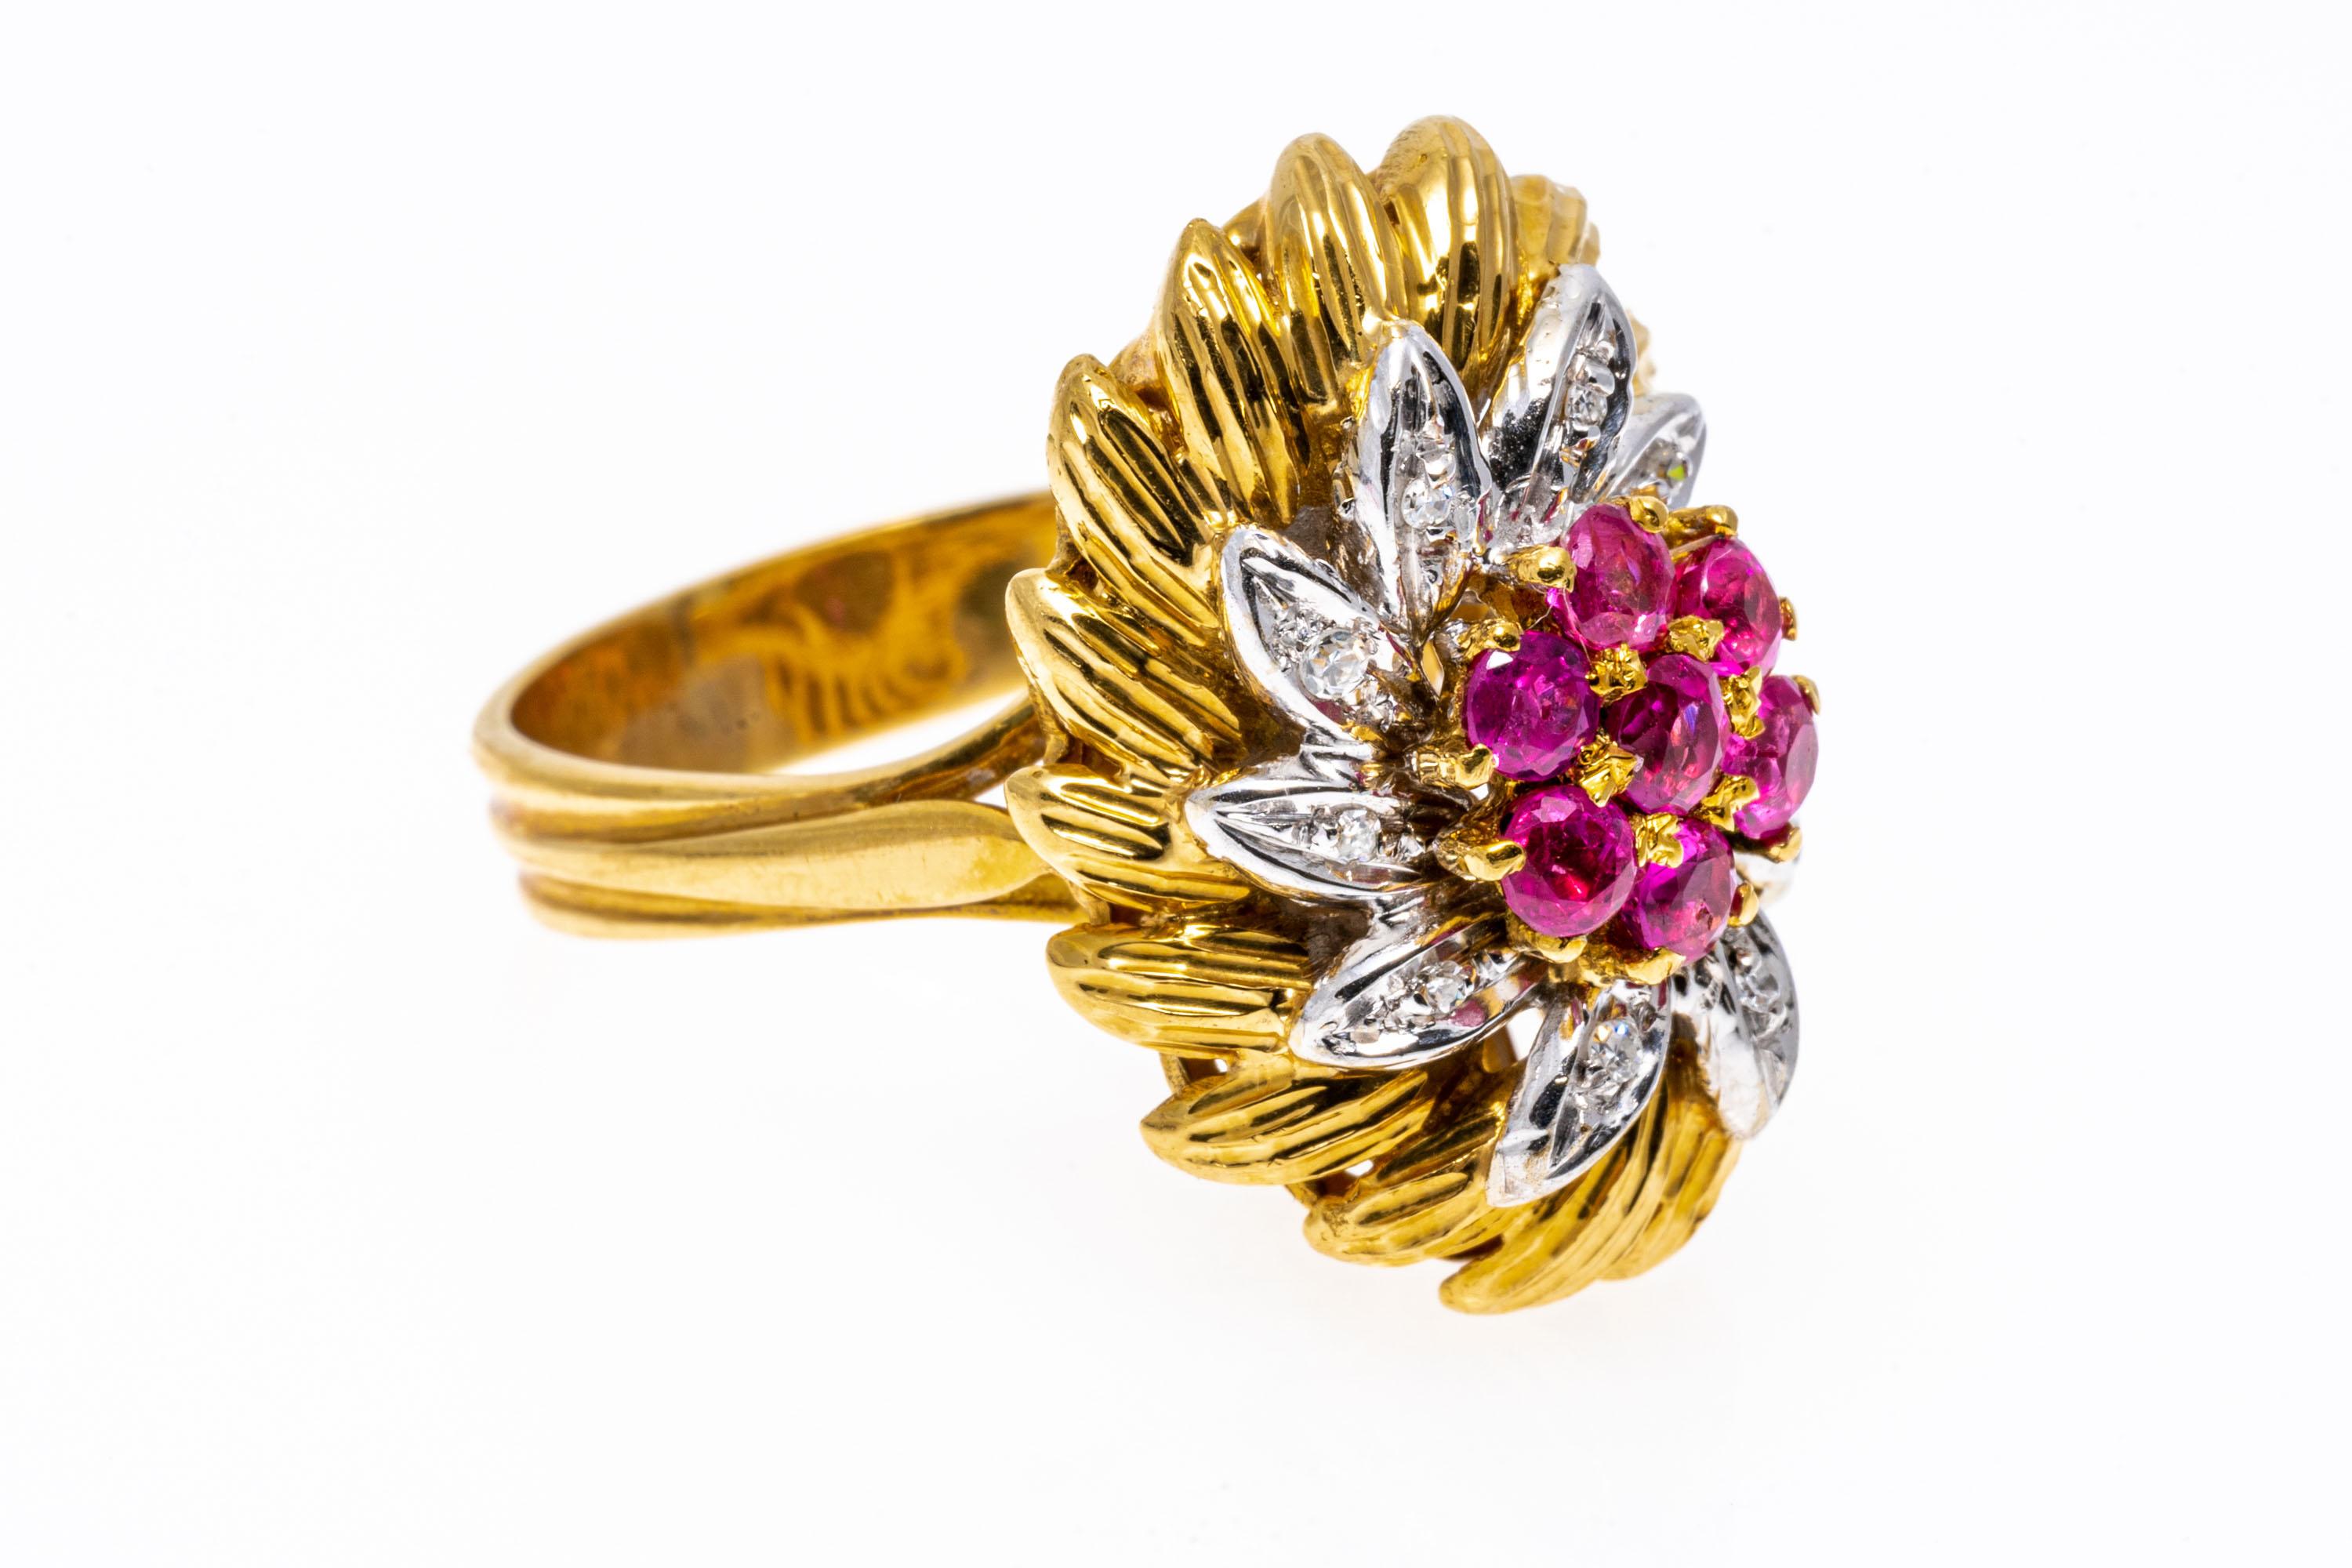 18k yellow gold ring. This fabulous yellow gold vintage ring is an elongated flower cluster style, with a center cluster of round faceted, light reddish pink color rubies, approximately 0.63 TCW, prong set. Surrounding the center is a white gold,